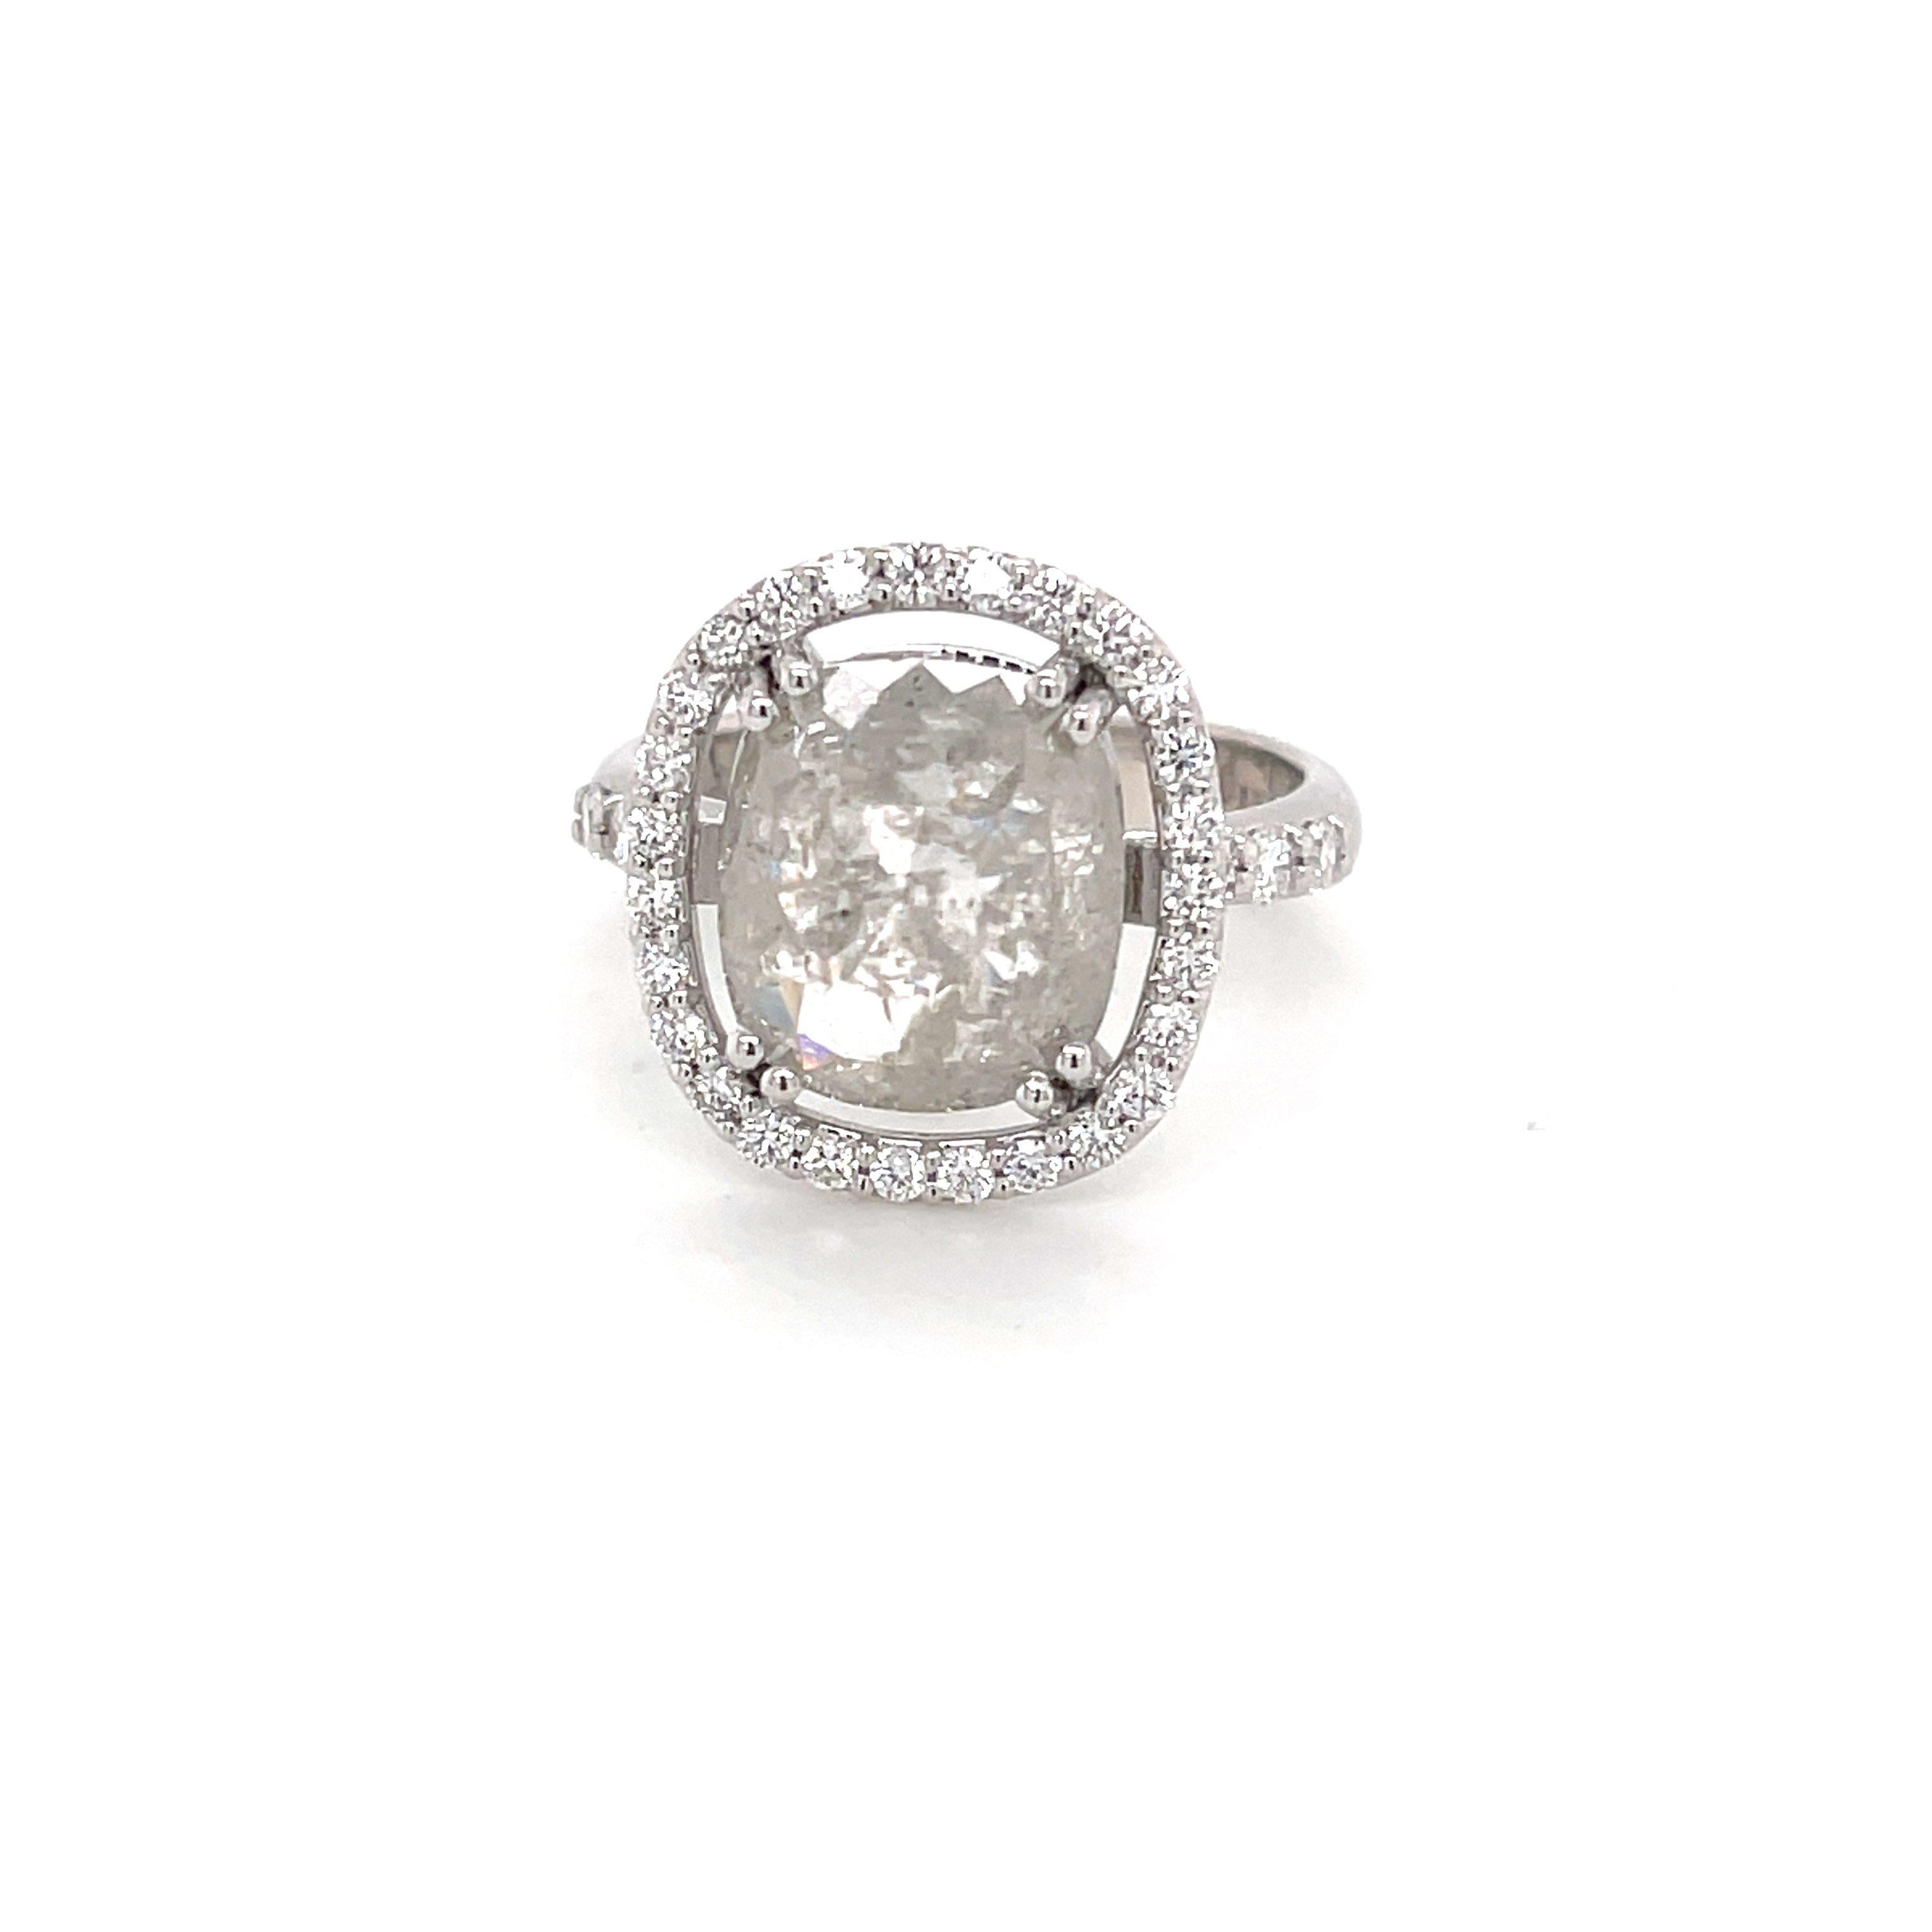 An 18k white gold ring set with one 4.33 carat cushion rose cut grey diamond, with .457 carats of white round diamonds. This ring was made and designed by llyn strong. Ring size 7.